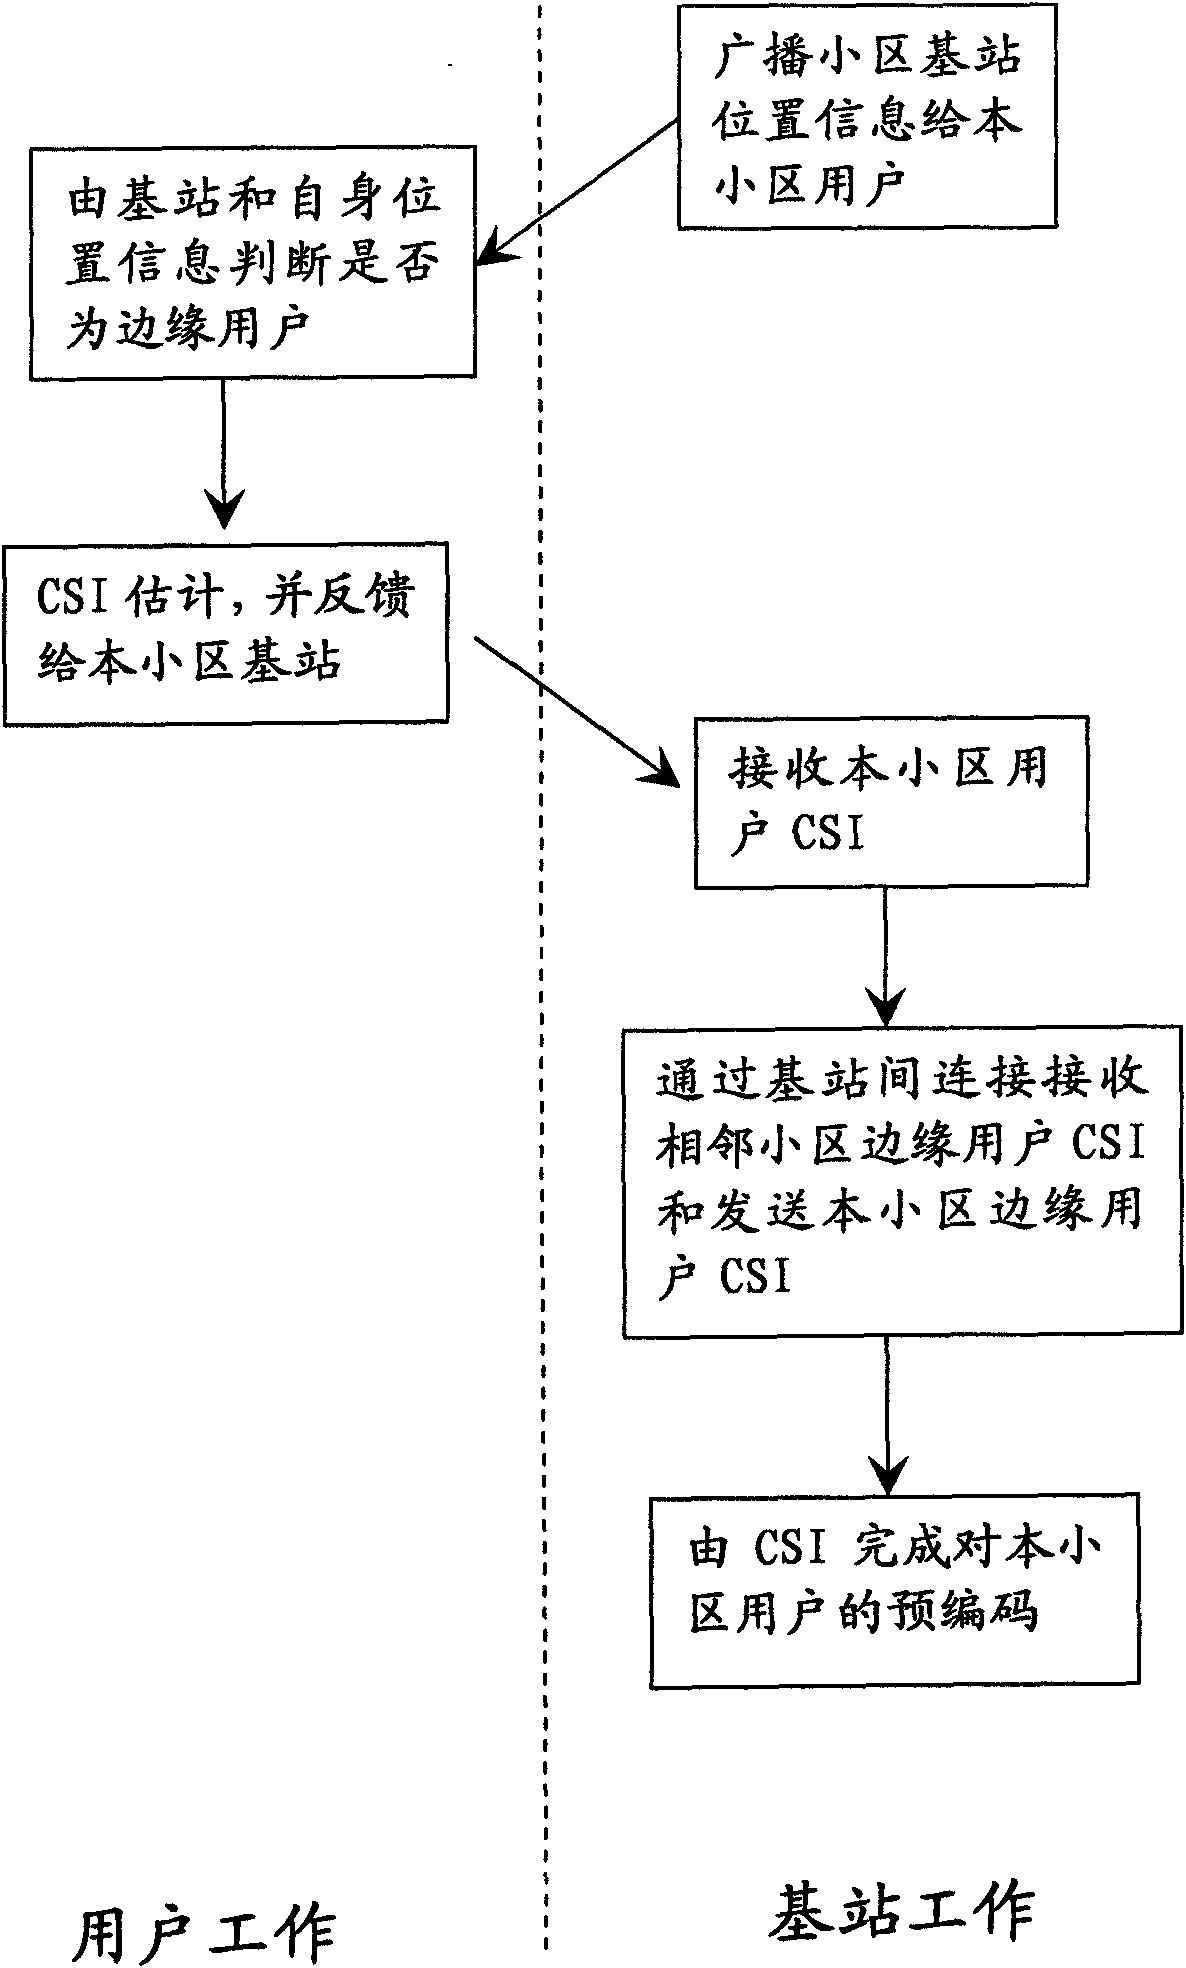 Anti-interval-interference base station downlink pre-coding method for multi-cell MIMO (Multiple-Input Multiple-Output) system